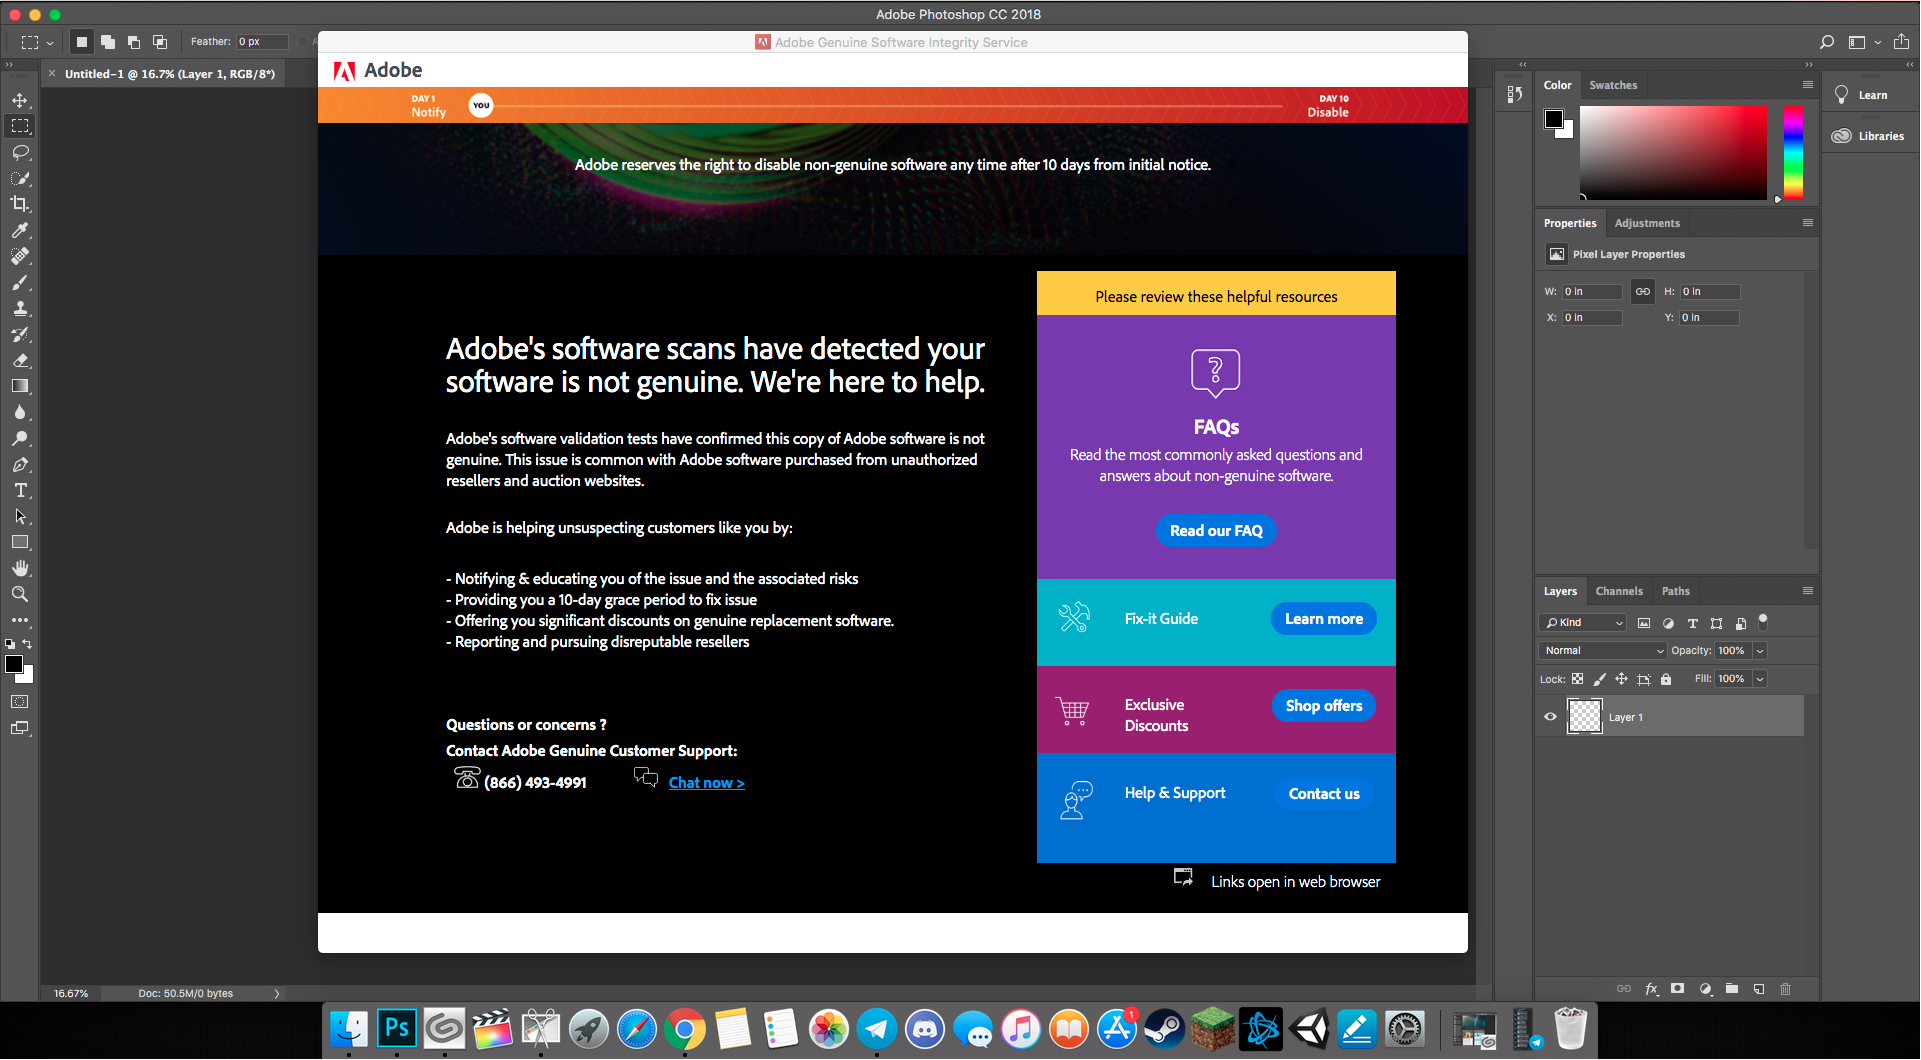 Disable adobe genuine software integrity service mac 2018